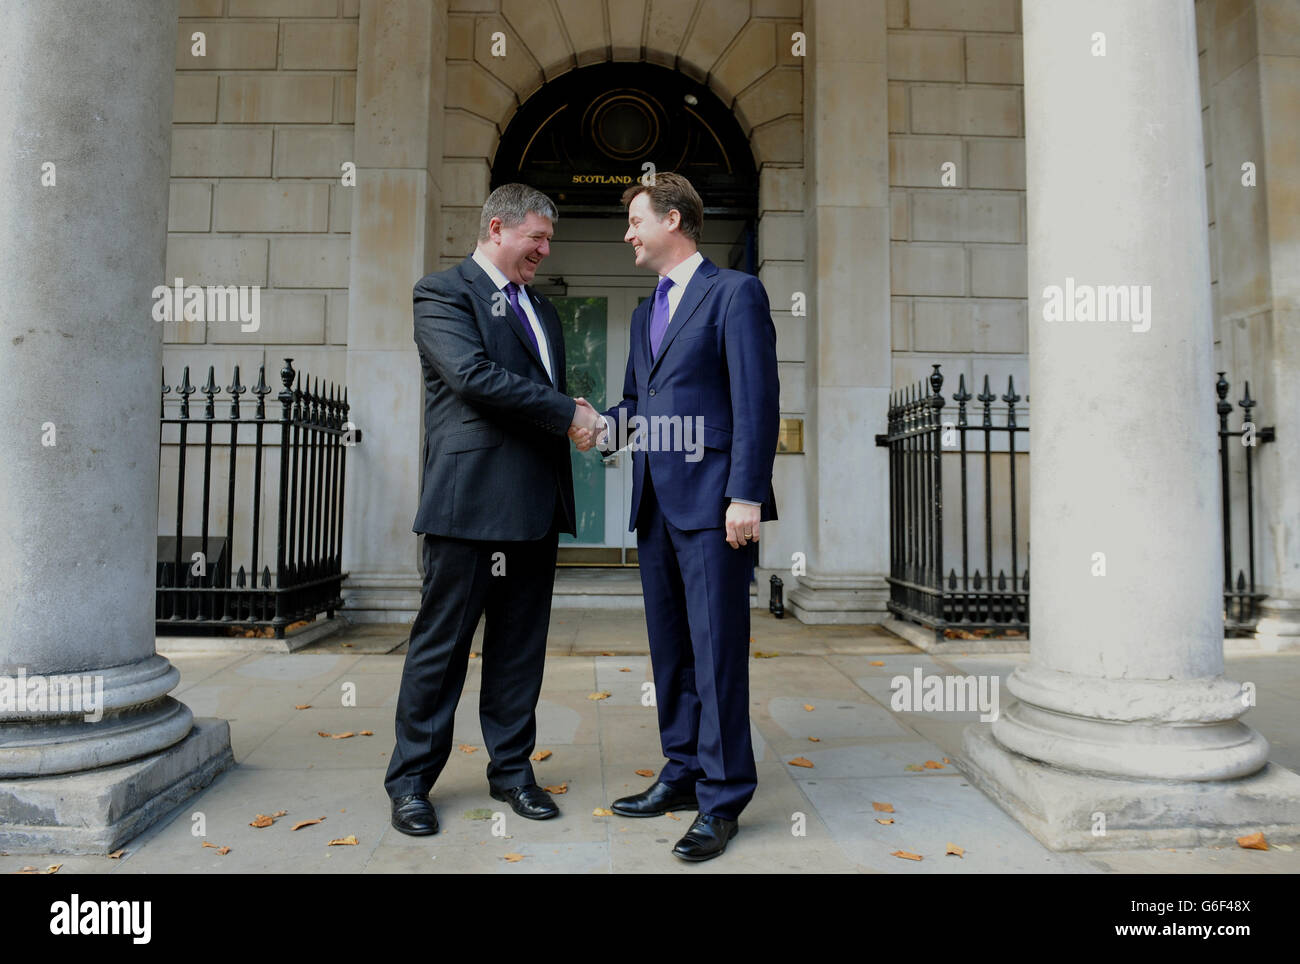 Orkney and Shetland MP Alistair Carmichael,(left) who has replaced Michael Moore as the Scottish Secretary, is greeted by Deputy Prime Minister and Liberal Democrat leader Nick Clegg, as he arrives at the Scotland Office, Whitehall, central London, after Prime Minister David Cameron, kicked off a coalition reshuffle, with Scottish Secretary Michael Moore among the casualties. Stock Photo